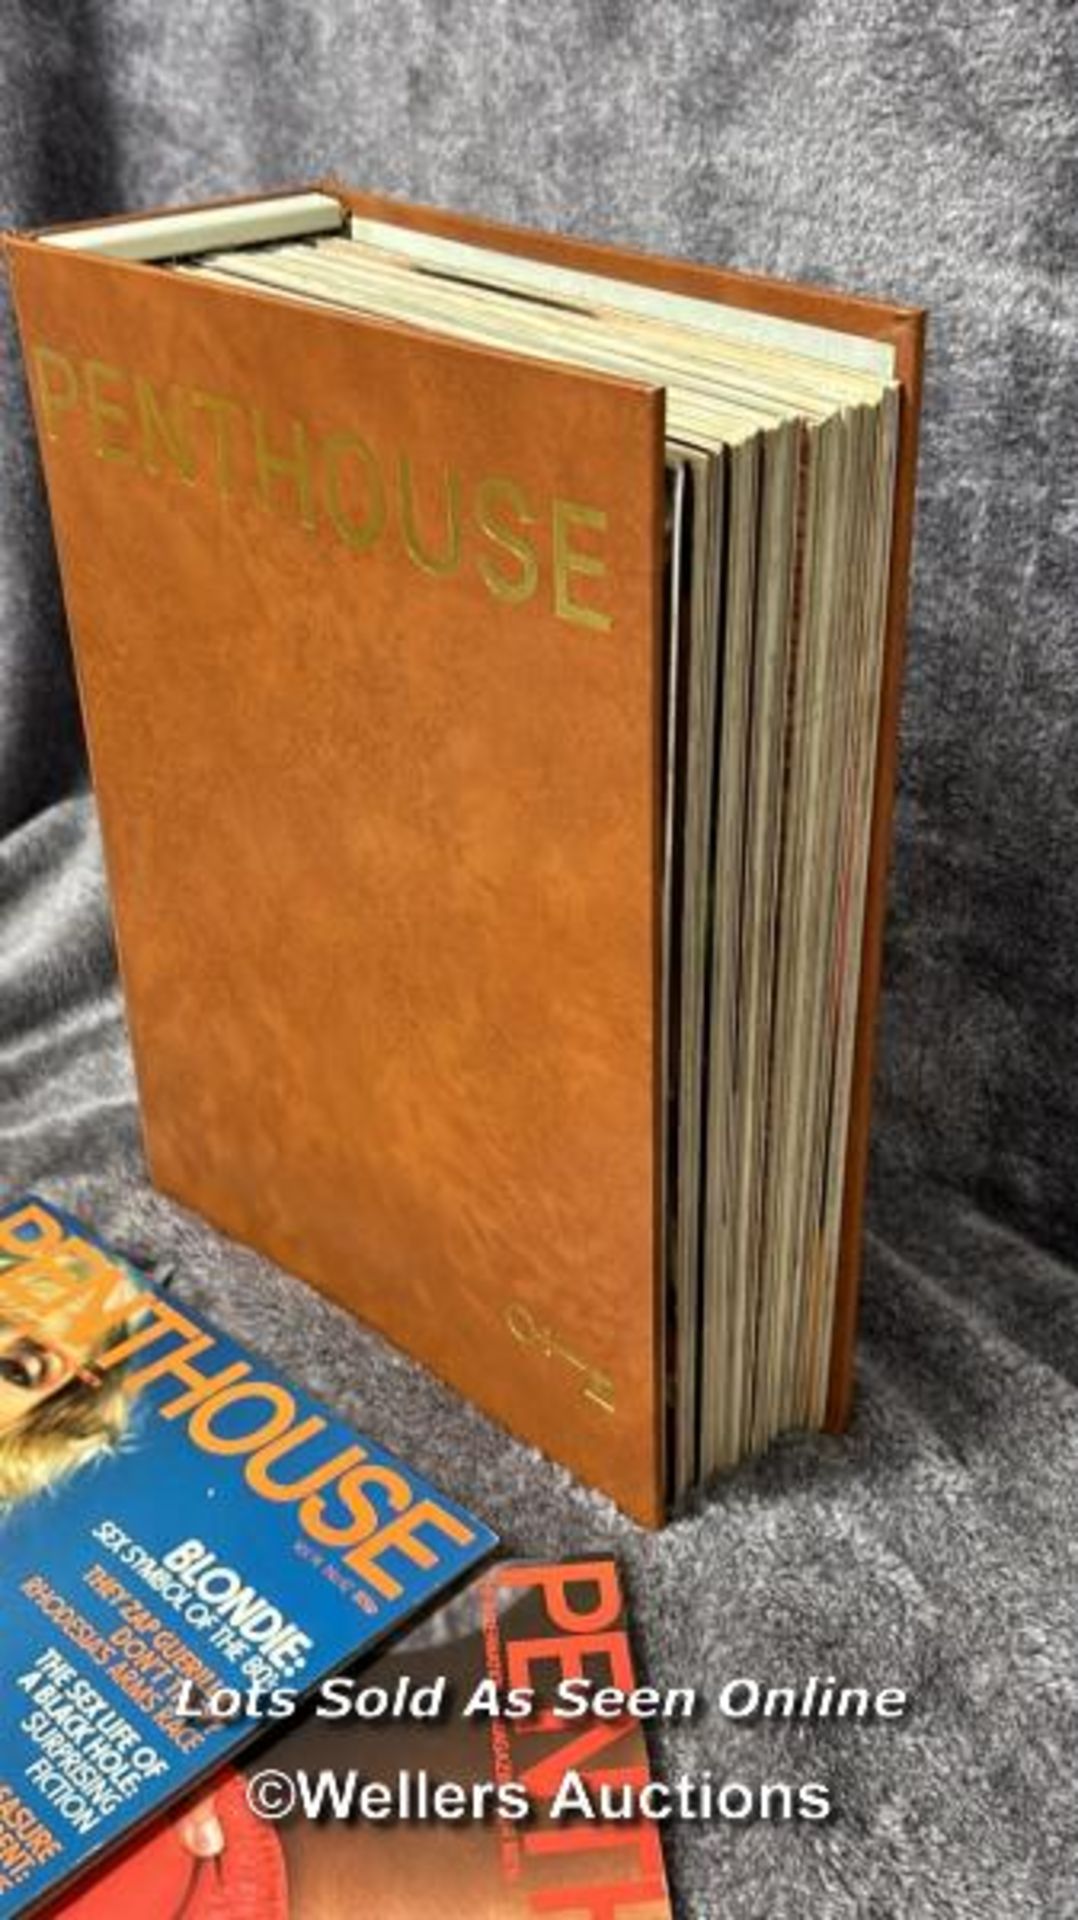 Vintage 1980 Penthouse magazines vol.15 issues 1-12 in binder with three issues from vol.14 / AN32 - Image 2 of 2